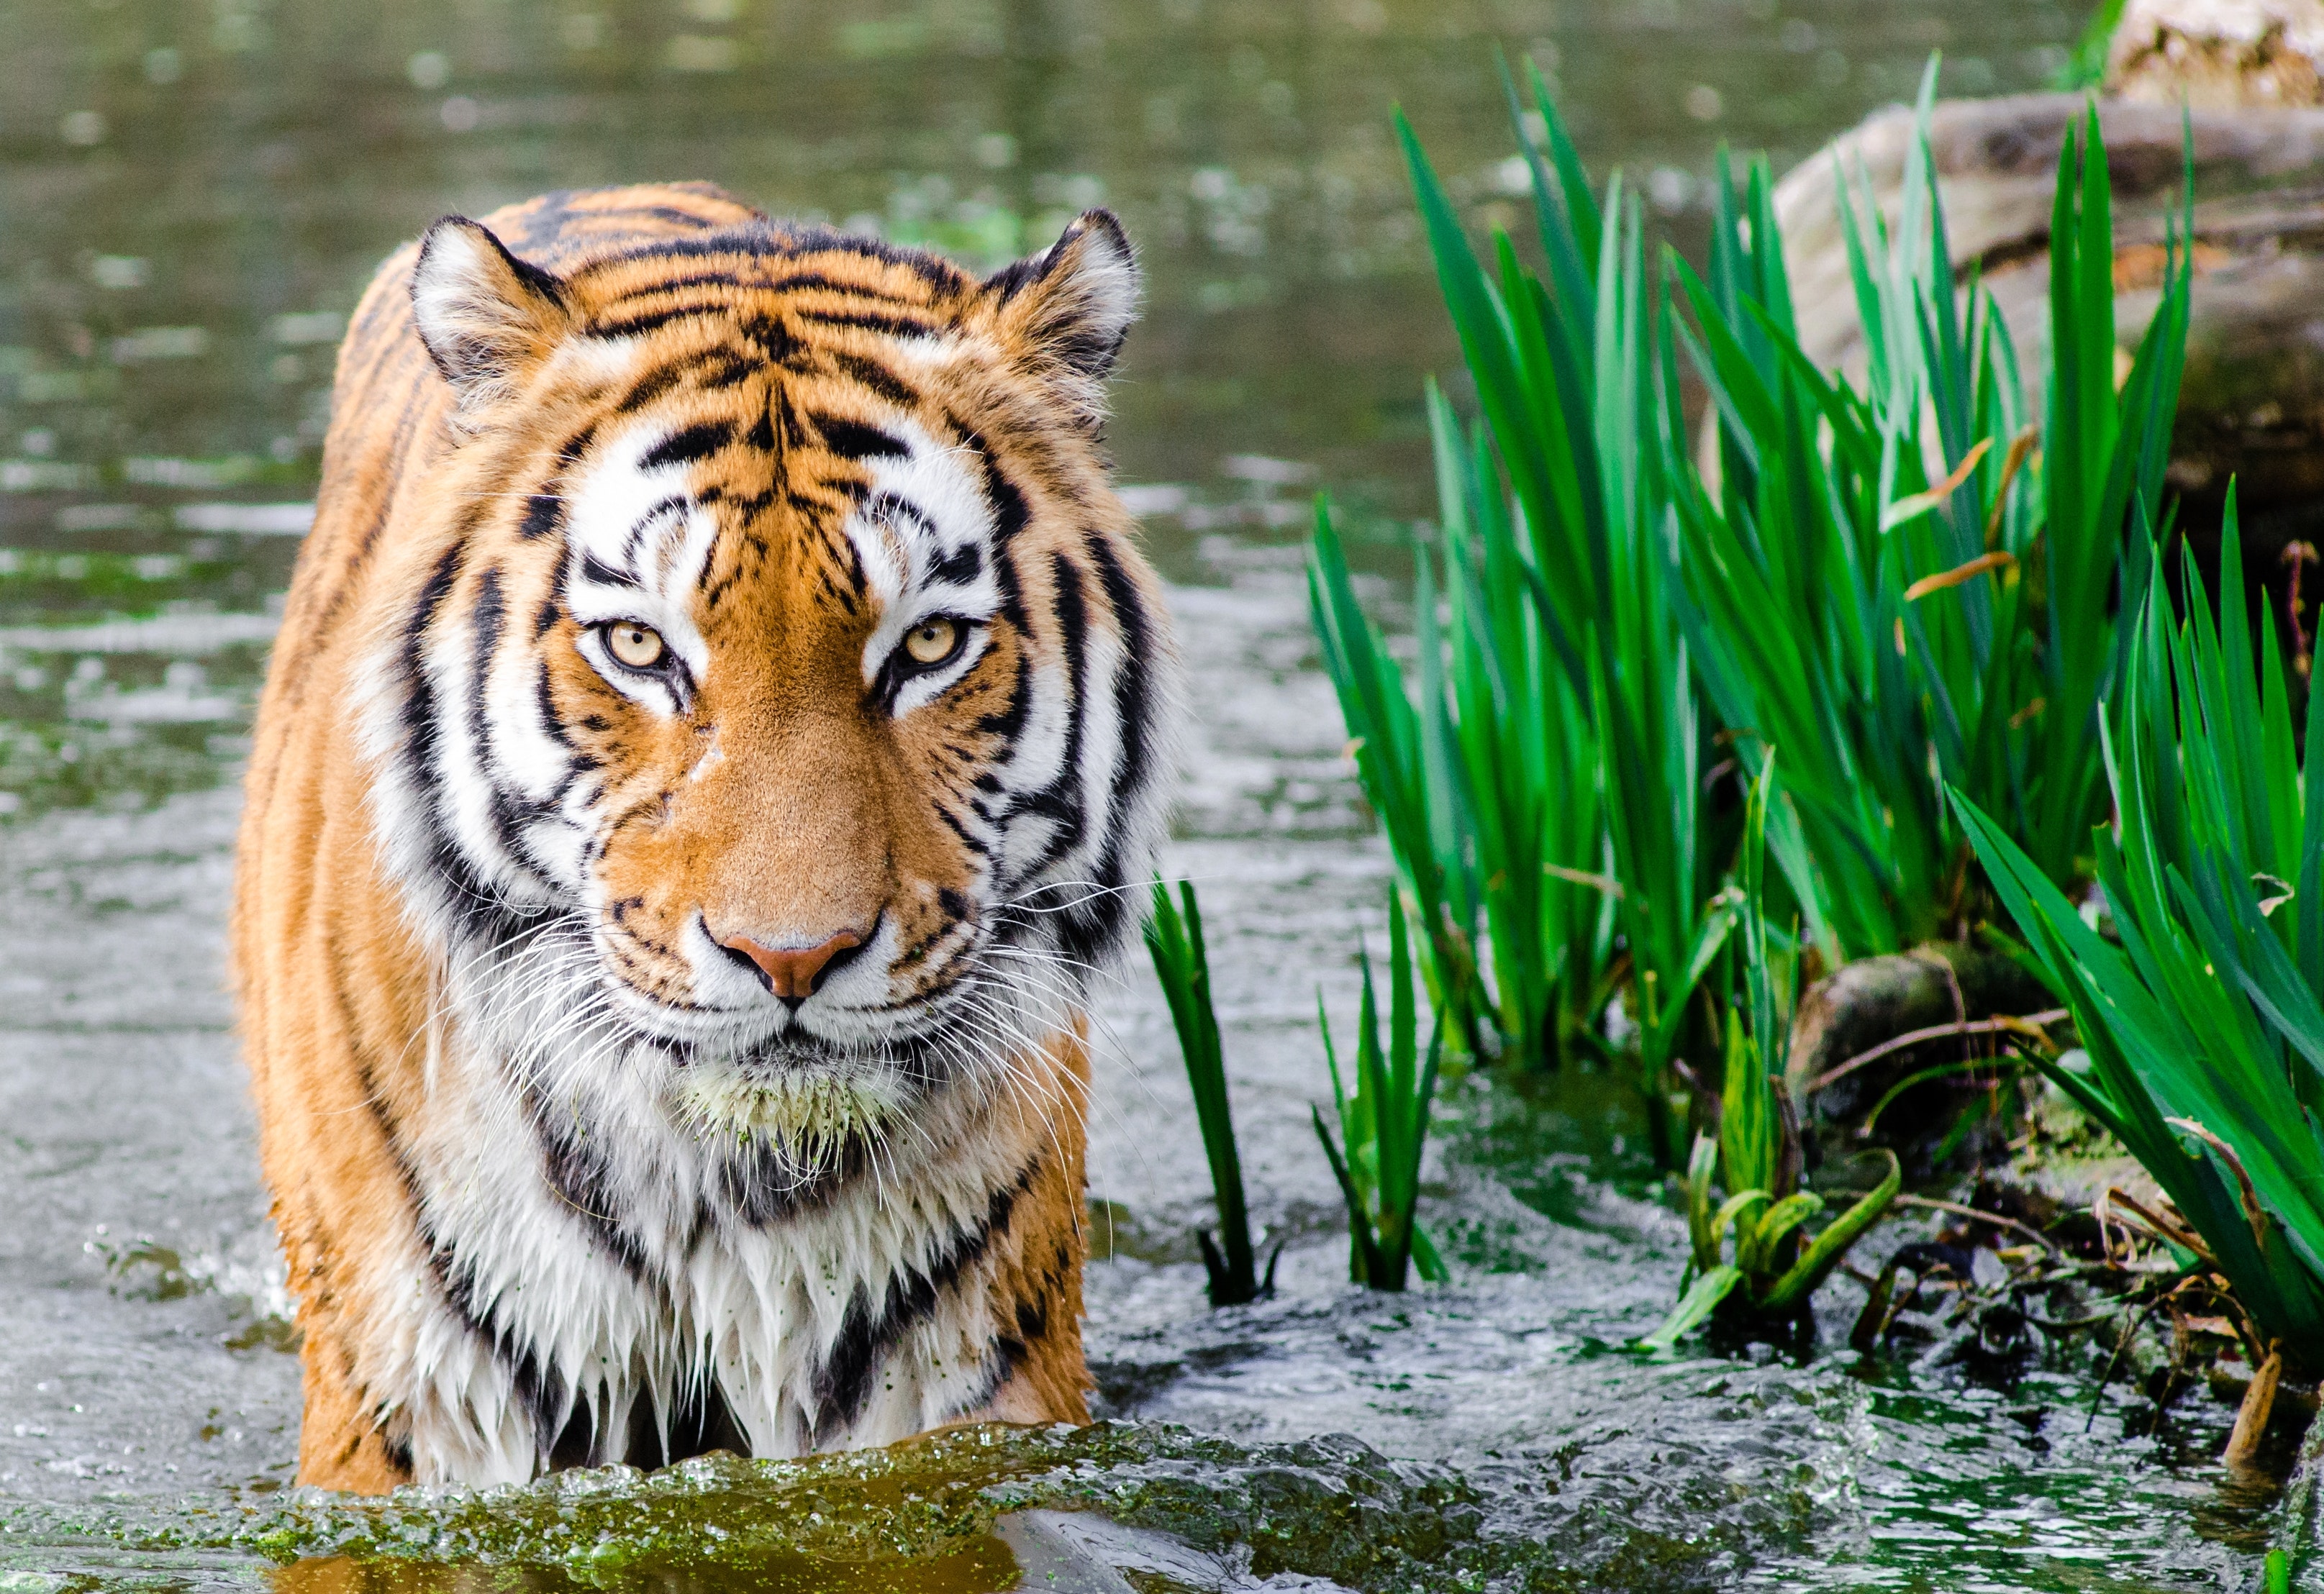 Tiger 4K wallpapers for your desktop or mobile screen free and easy to  download